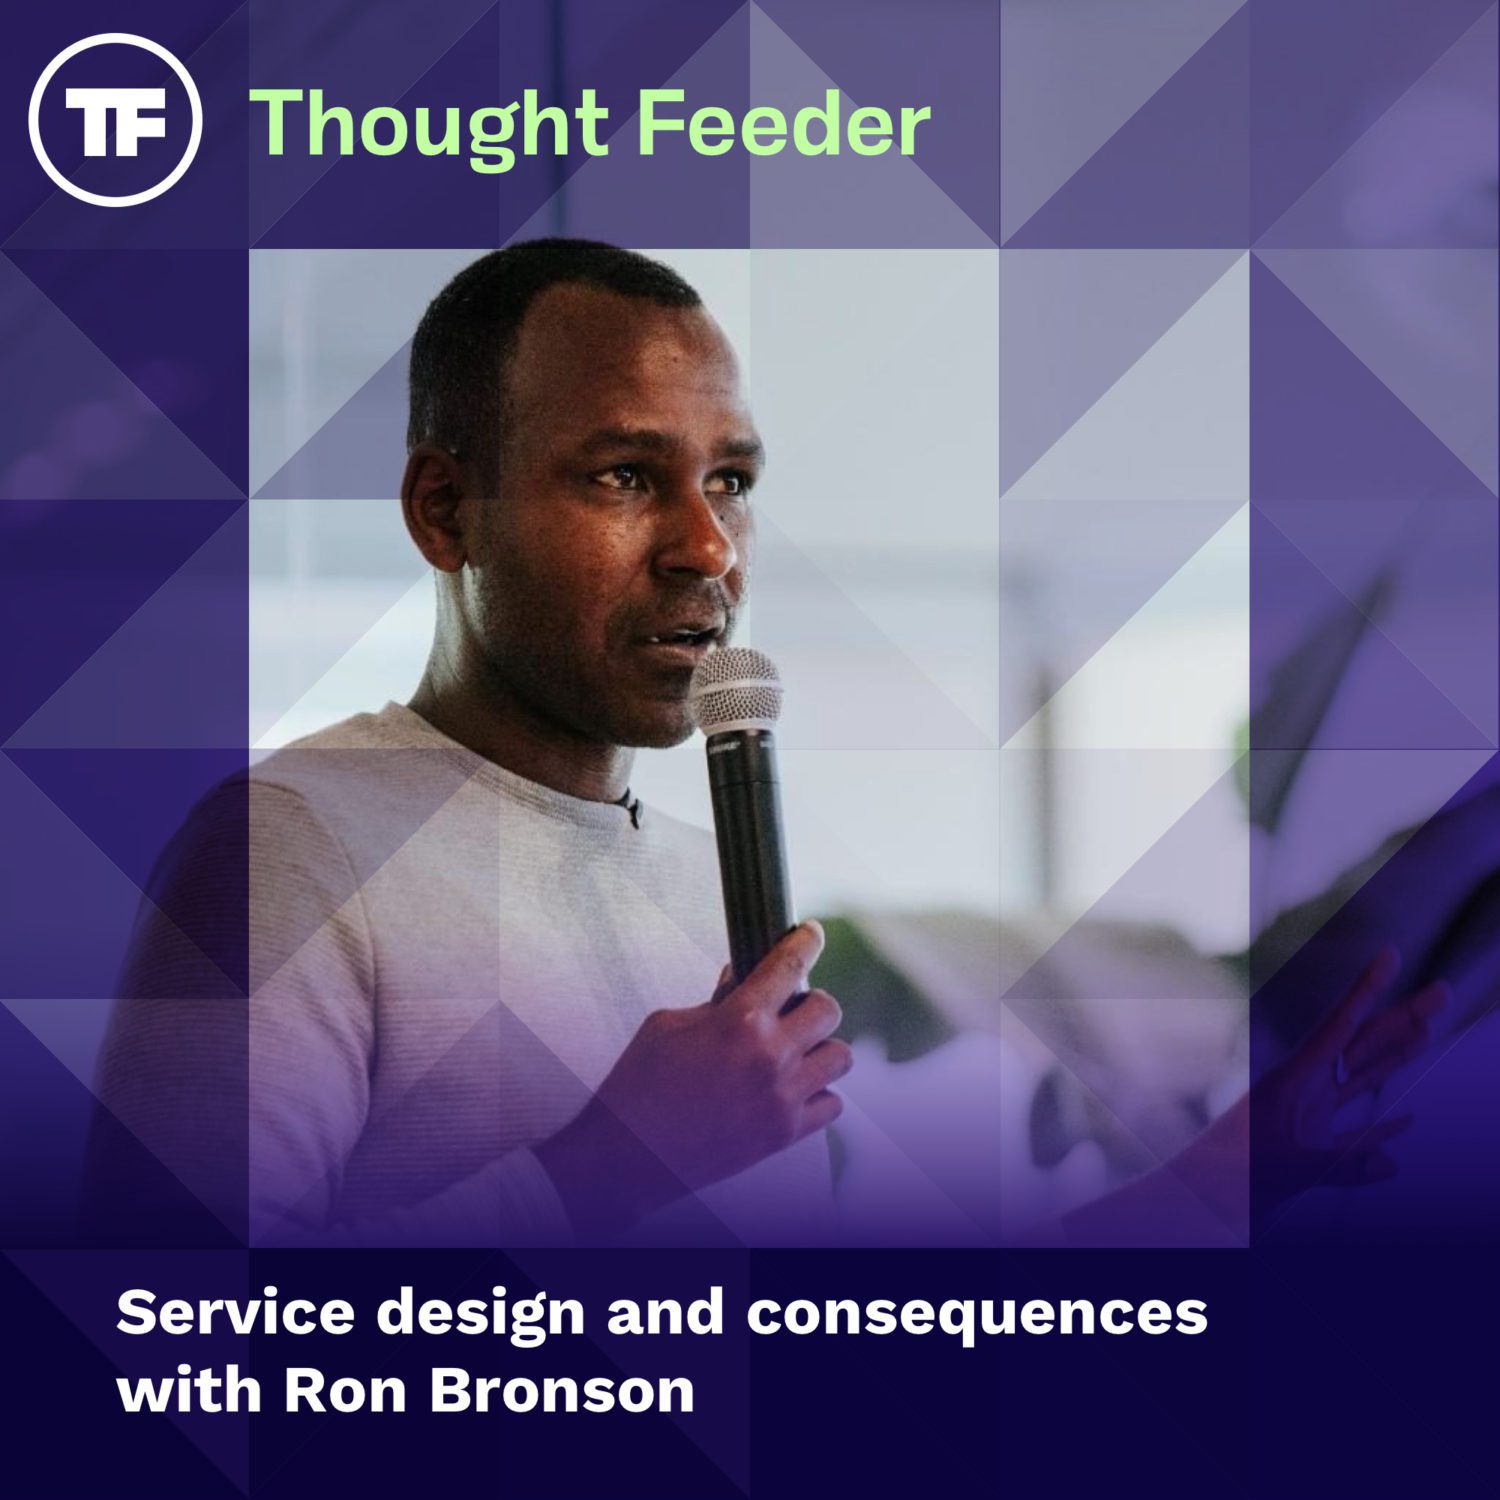 Service design and consequences with Ron Bronson